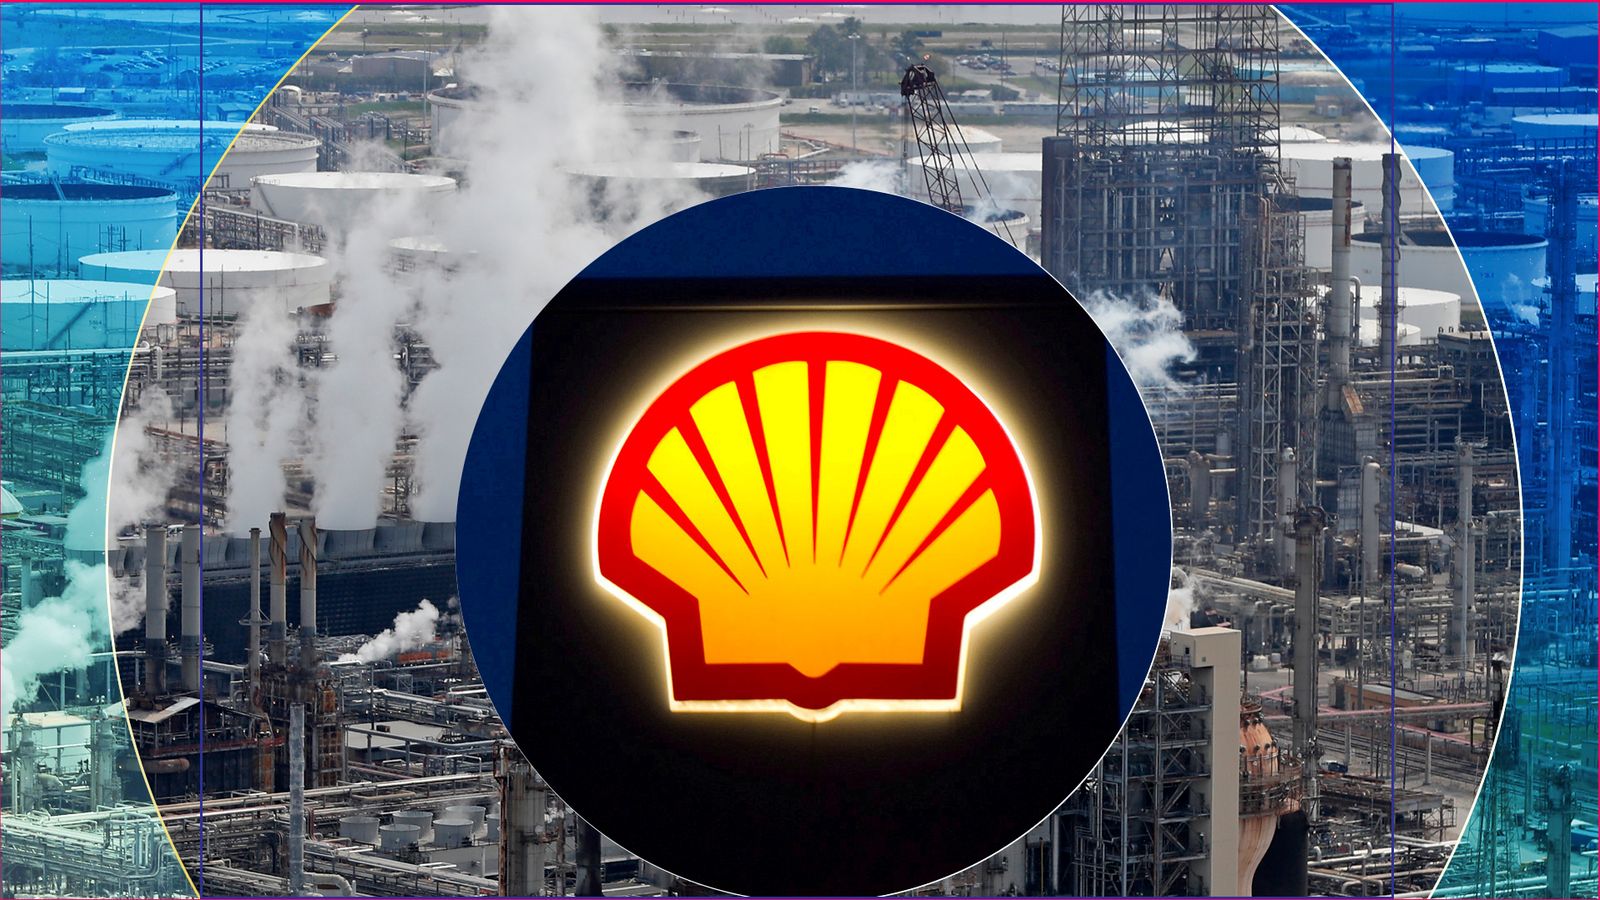 Multinational oil company Royal Dutch Shell has been ordered in court to slash its carbon emissions in order to protect the environment from climate c